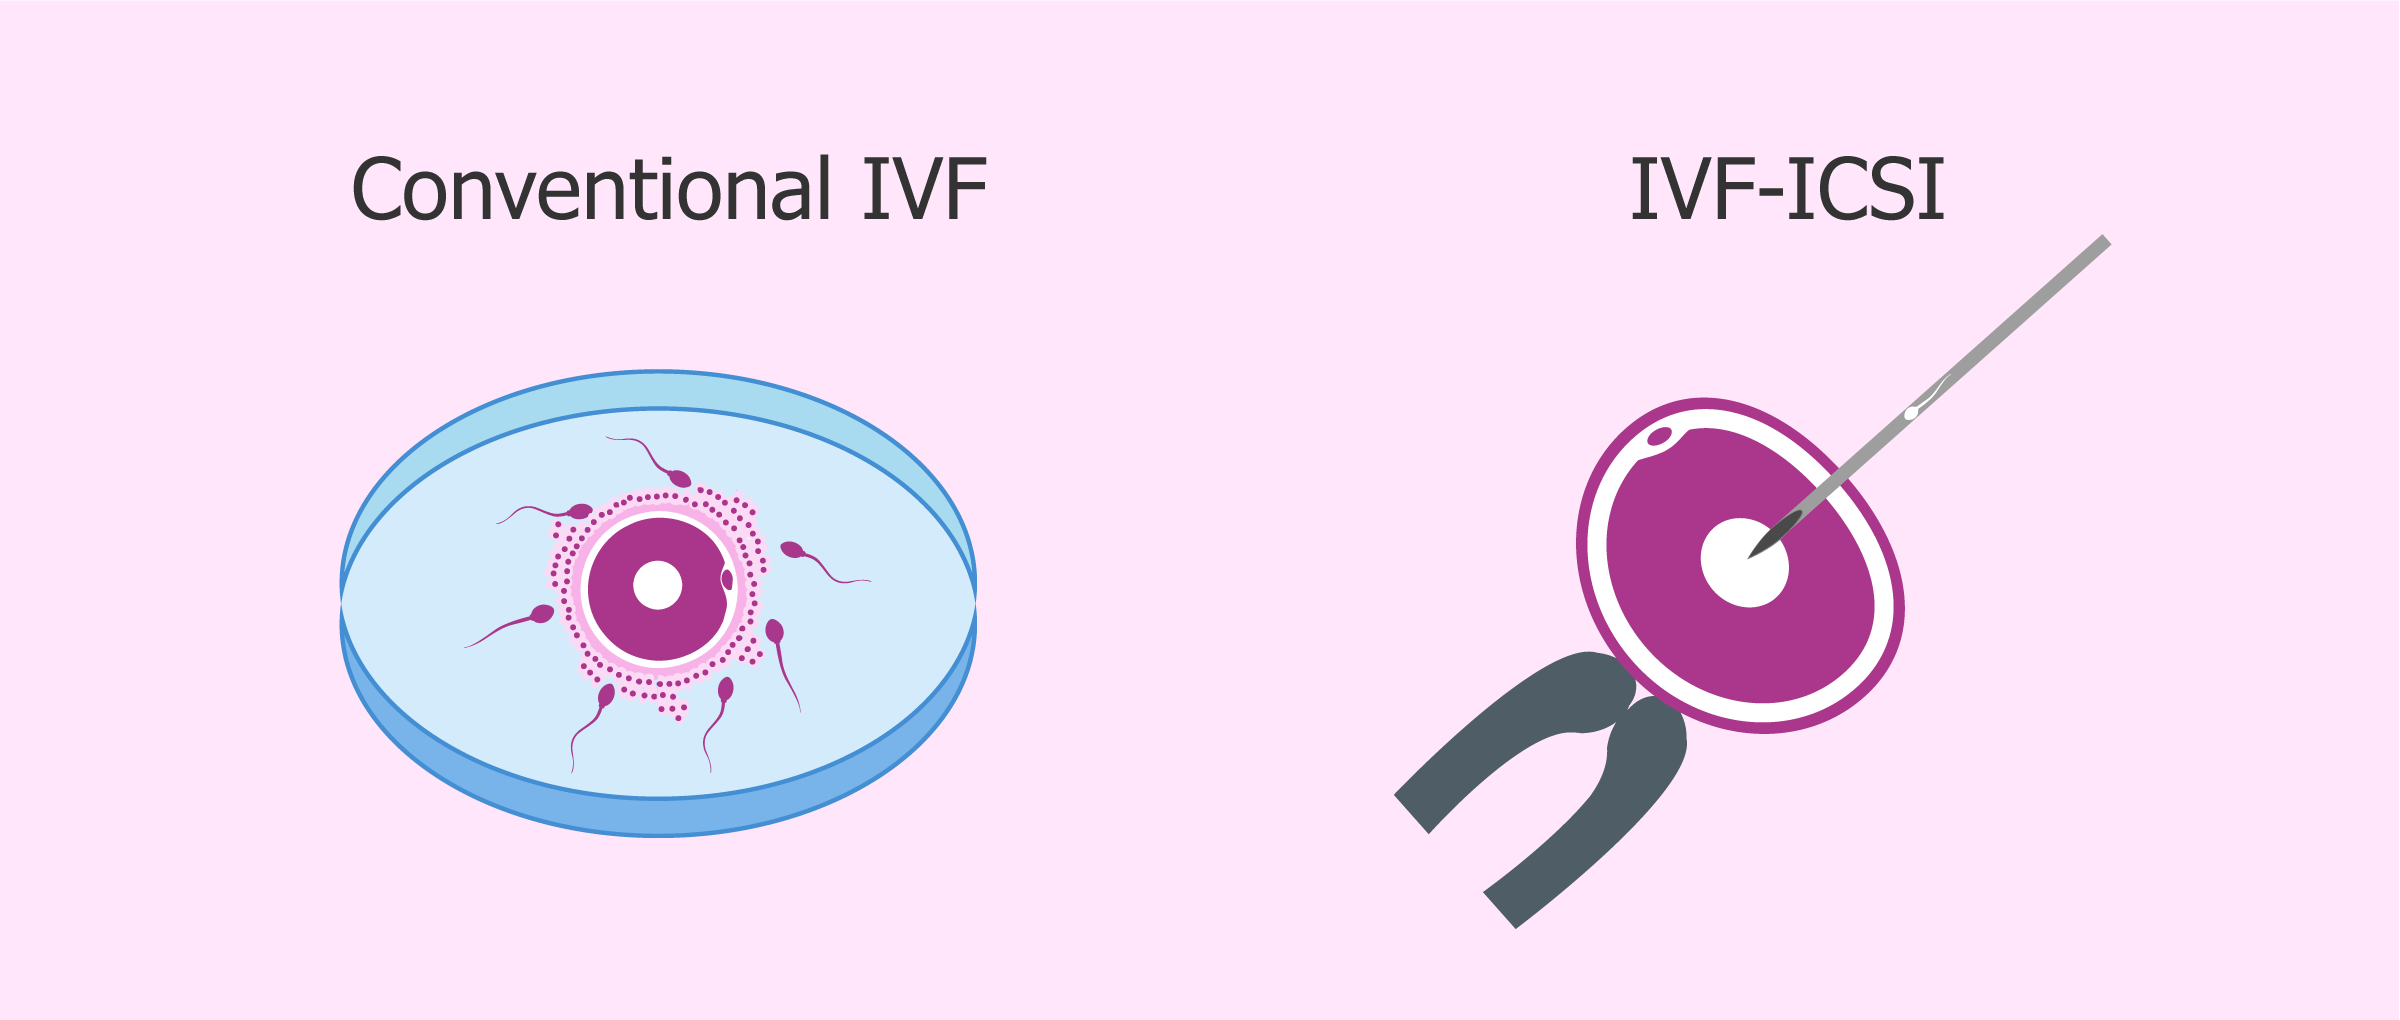 How is ICSI different from IVF